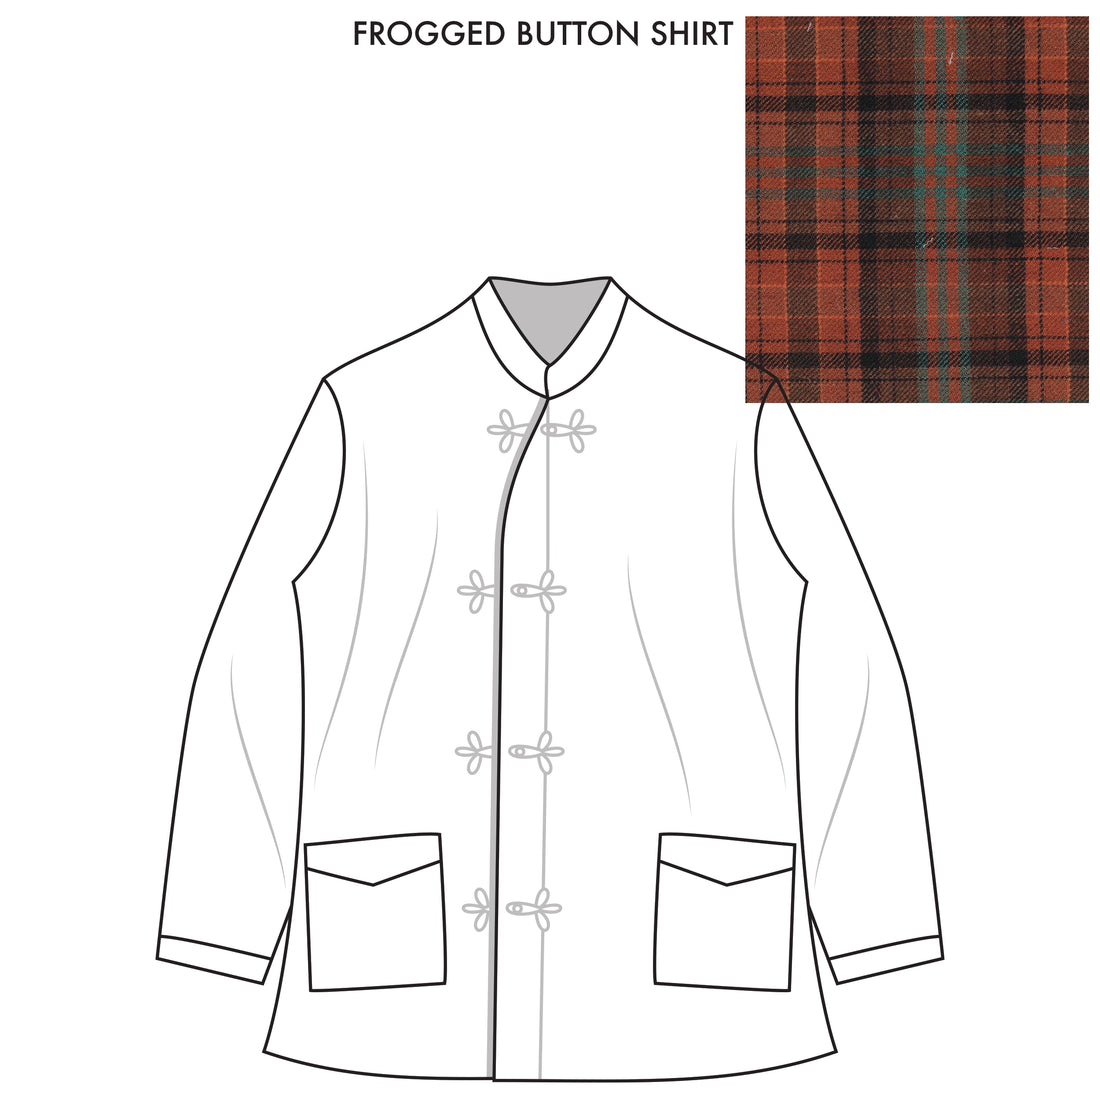 Bryceland’s Frogged Button Shirt Made-to-order Rust/Green Plaid